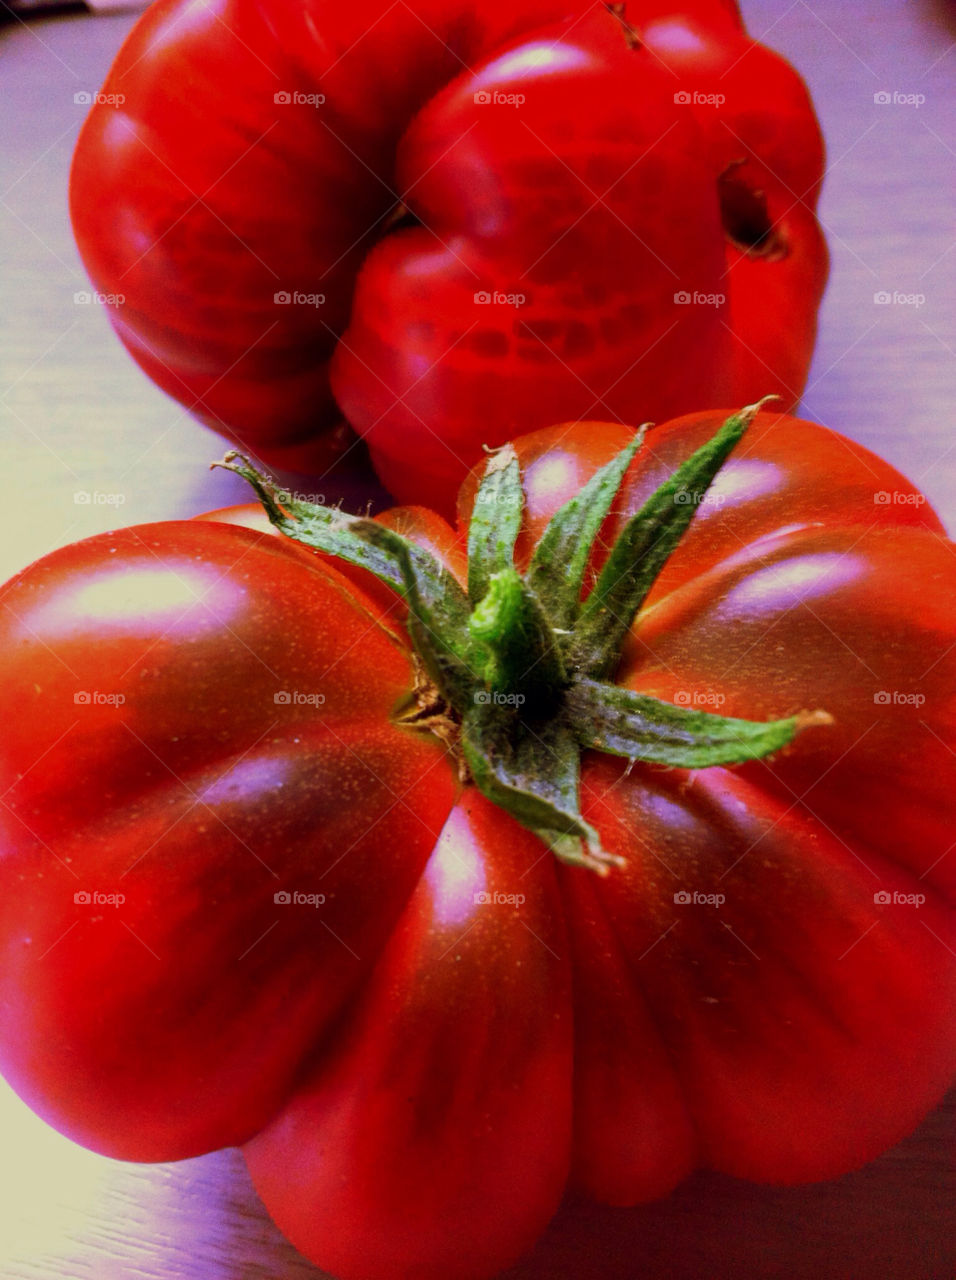 red autumn tomato cultivated by eksw